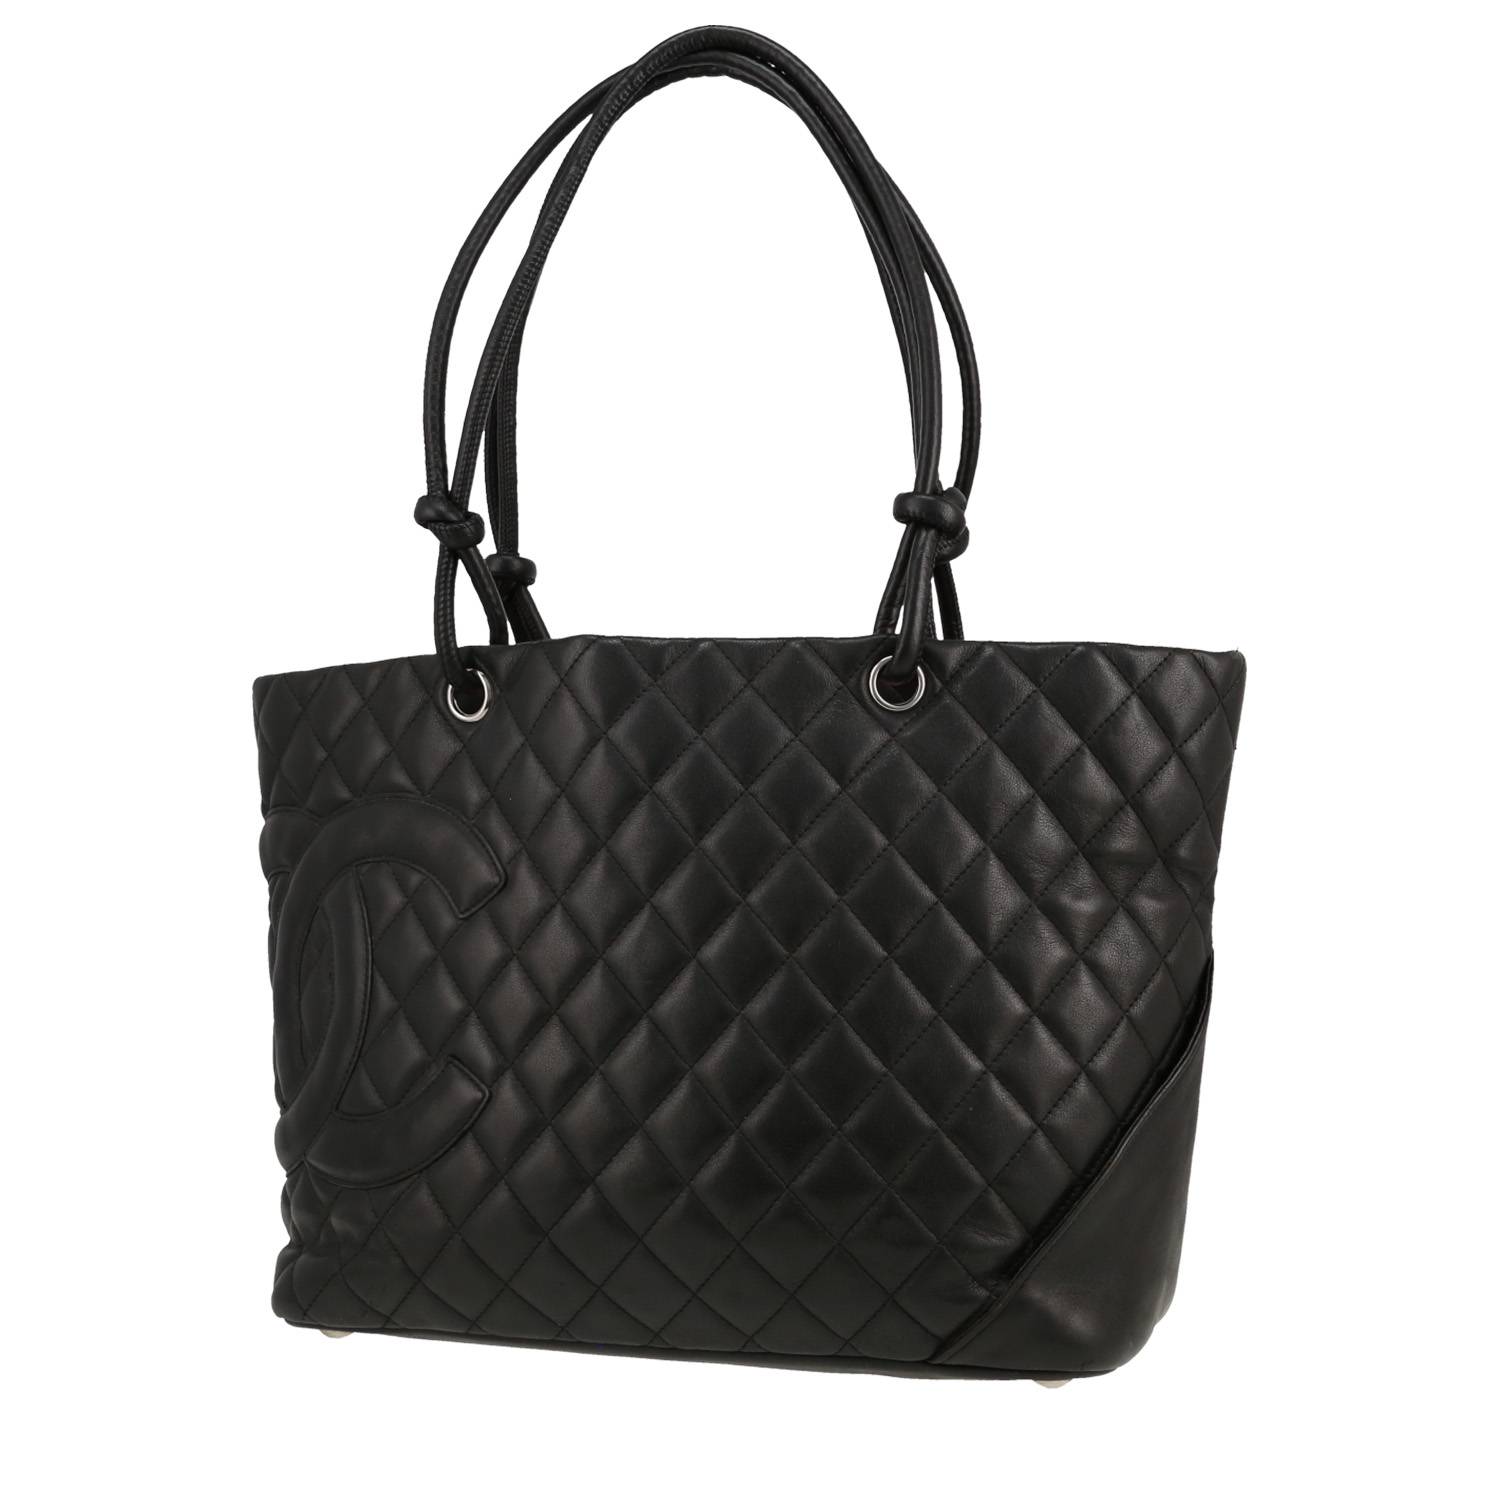 Cambon Handbag In Black Quilted Leather